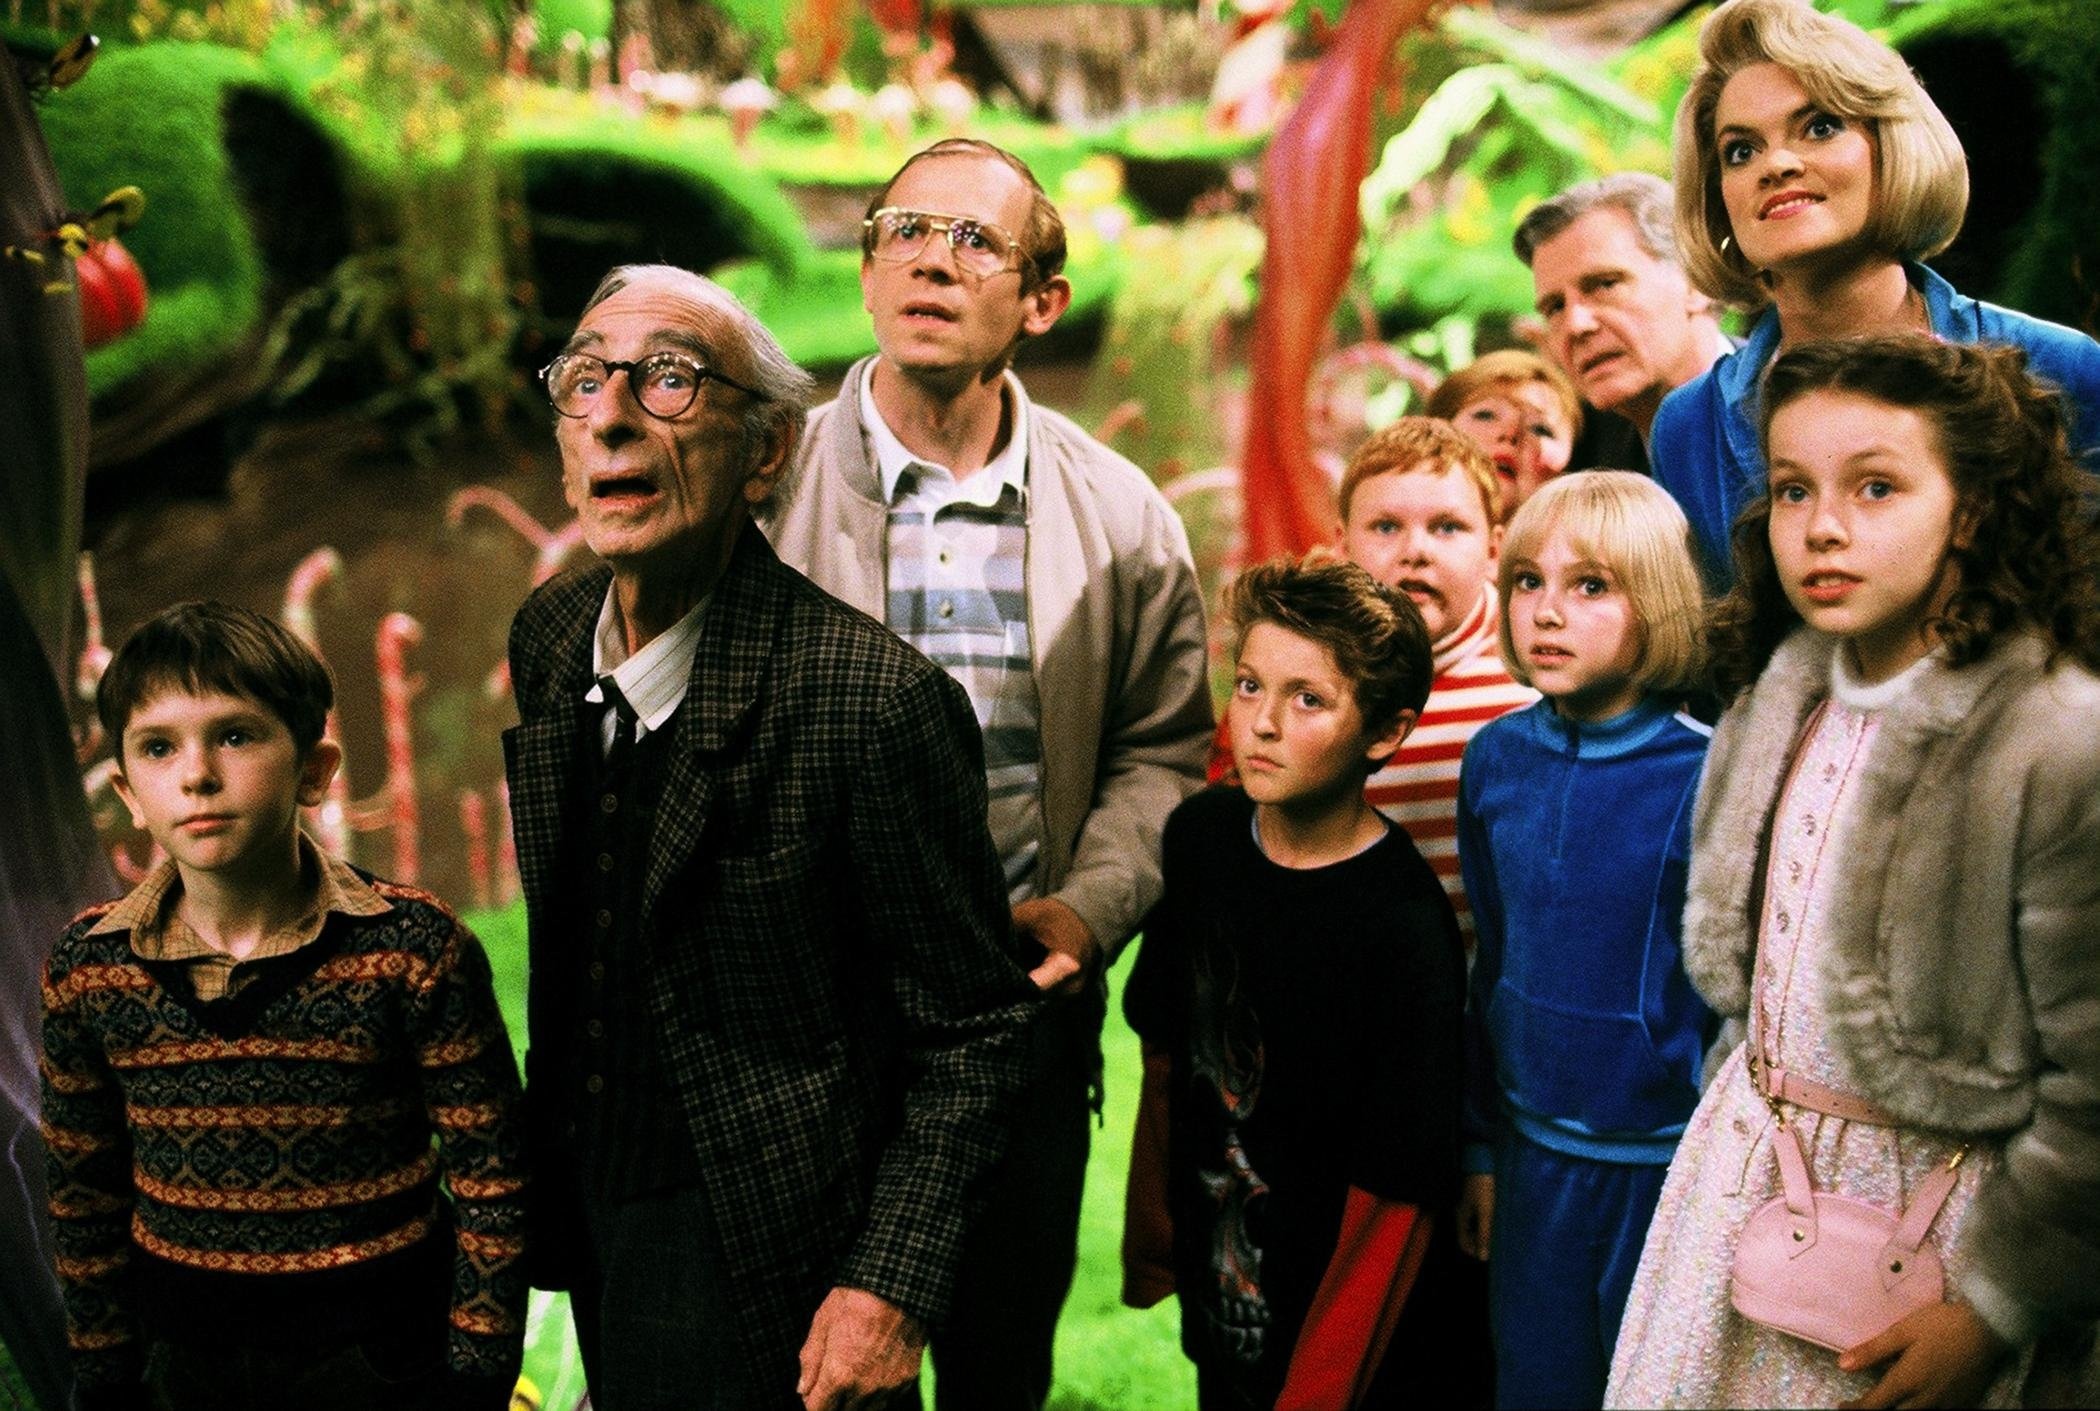 Charlie and the Chocolate Factory, Delectable adventure, Comedy family fantasy, Musical wallpaper, 2100x1420 HD Desktop